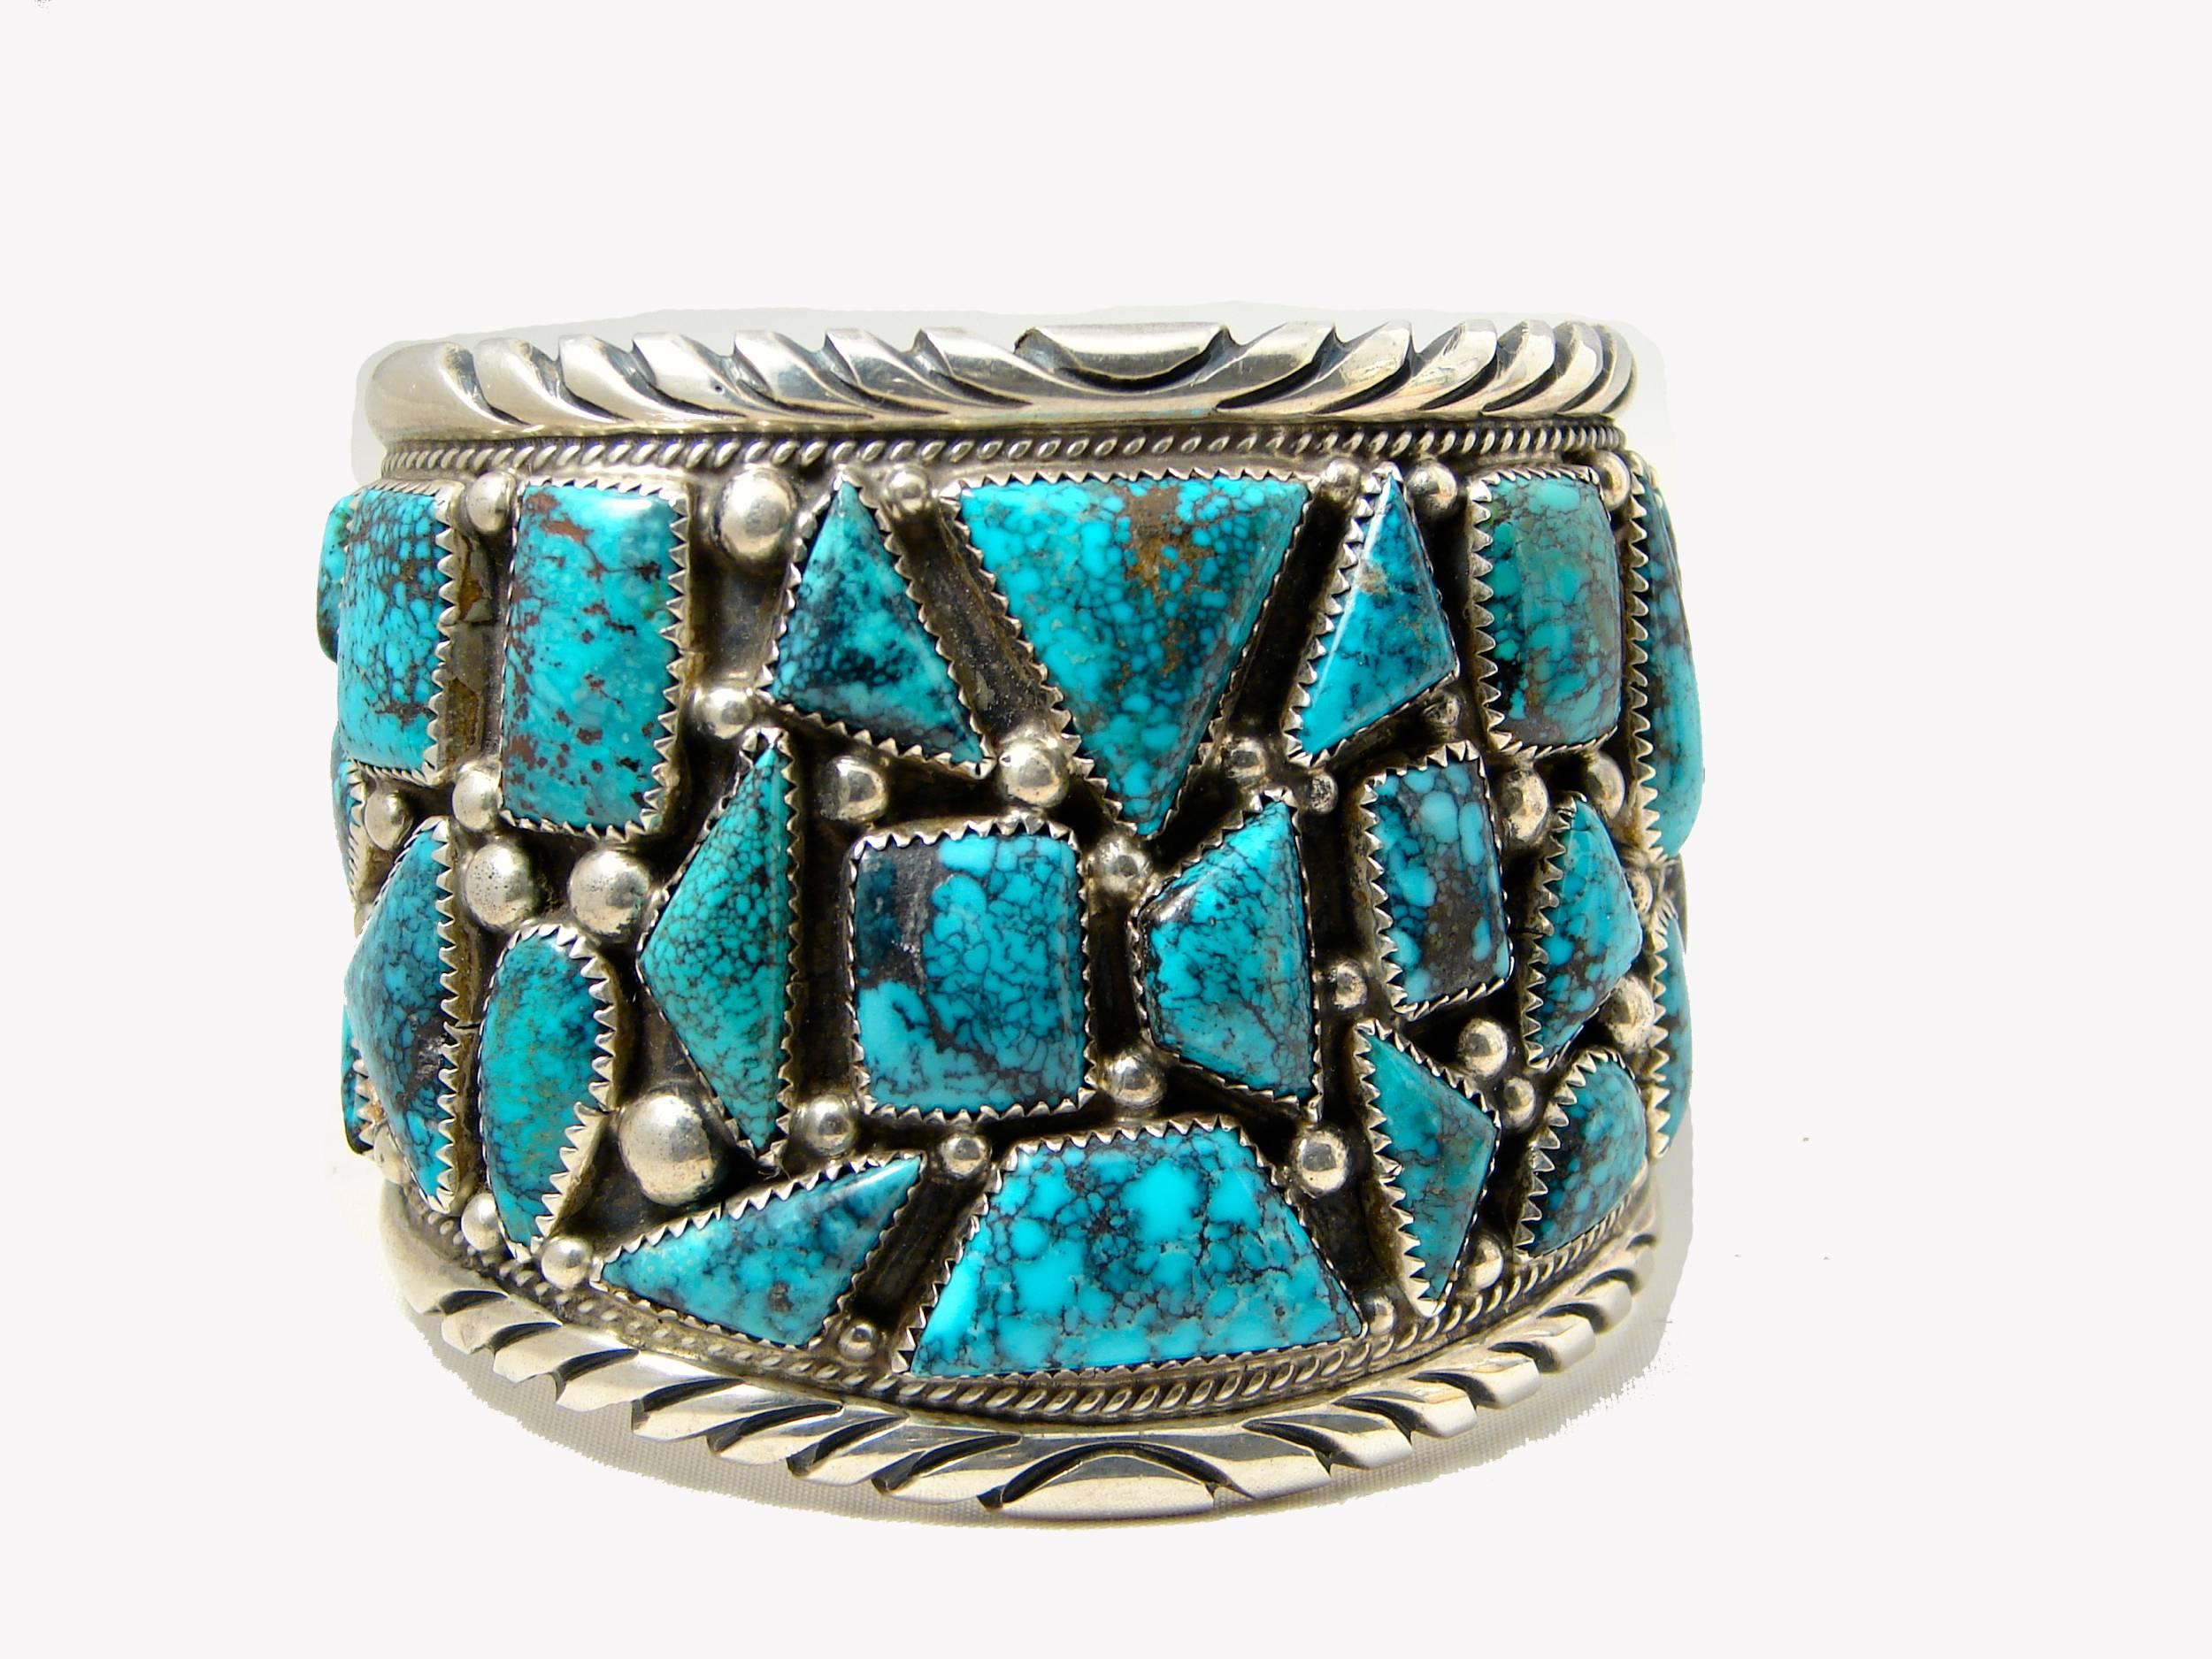 Here's a stunning large Turquoise and Sterling Silver Cuff Bracelet from Navajo artisan Tommy Moore.  This is one of his earlier designs and it features chunky turquoise throughout. It measures 2.25